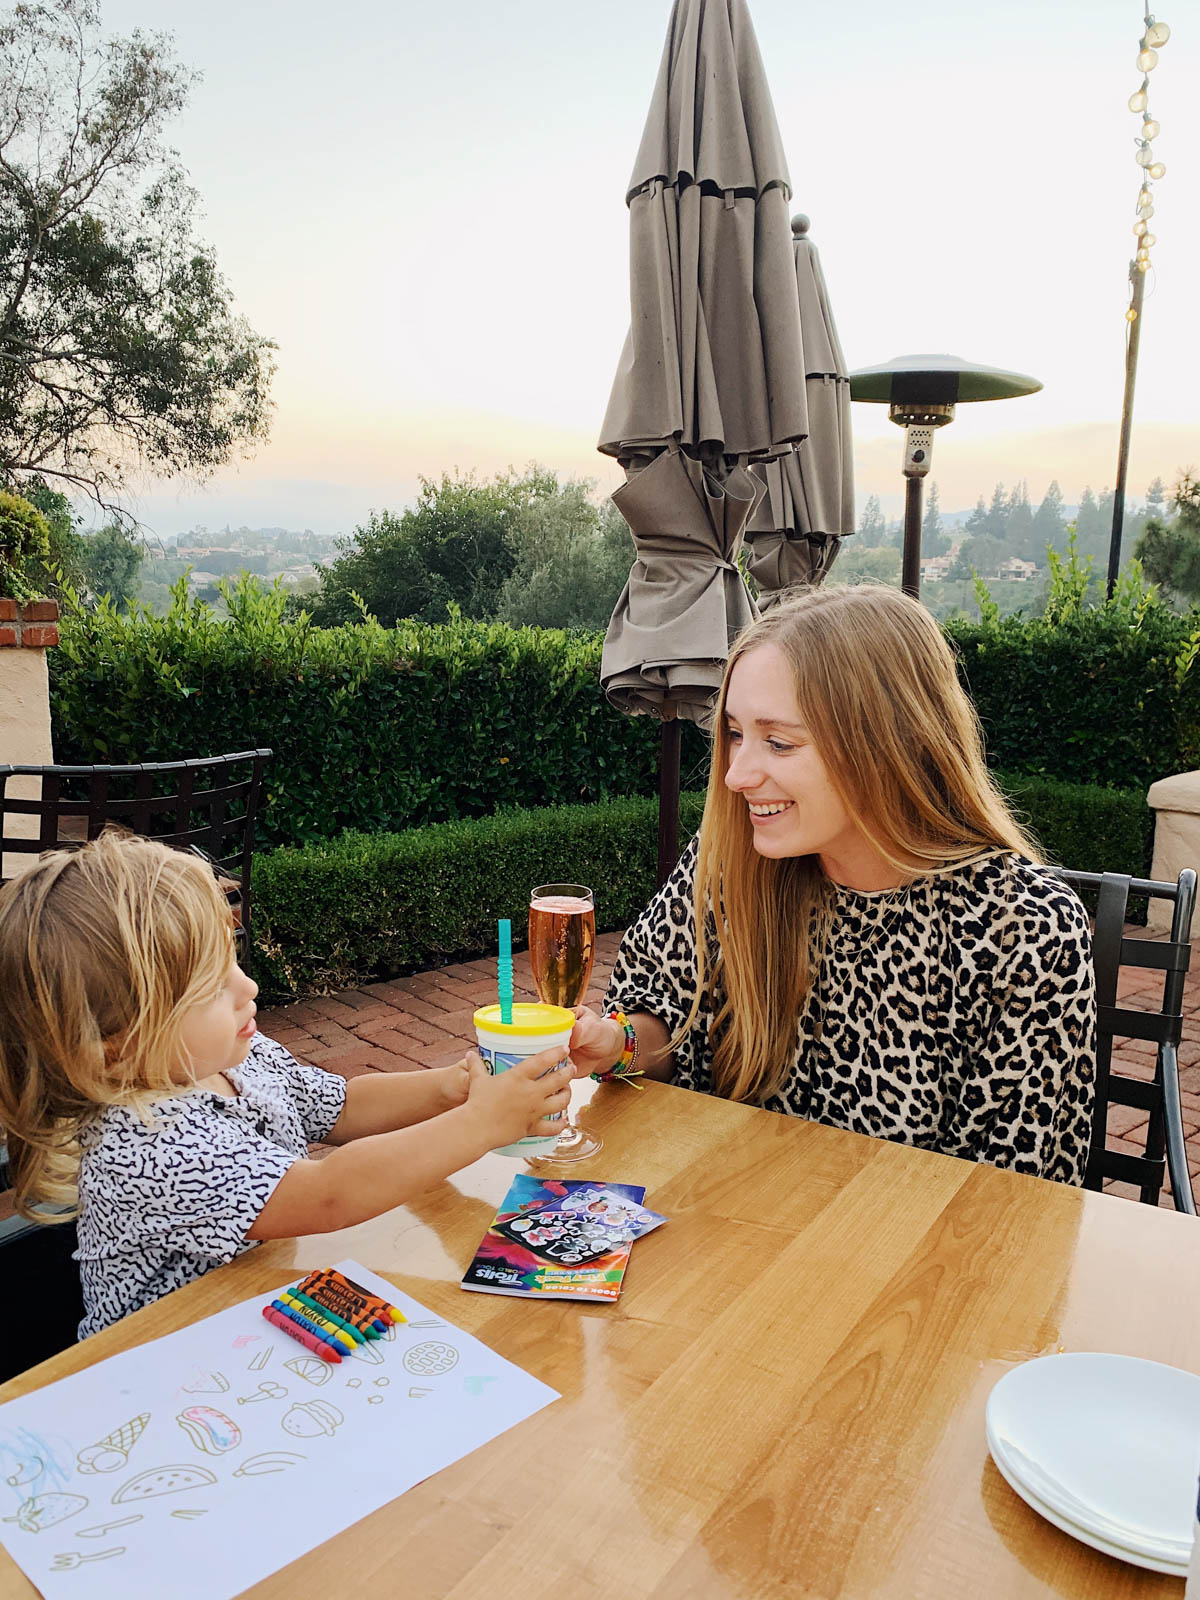 eatsleepwear goes on a family trip with toddler to Rancho Bernardo Inn showing mother and son at dinner outside